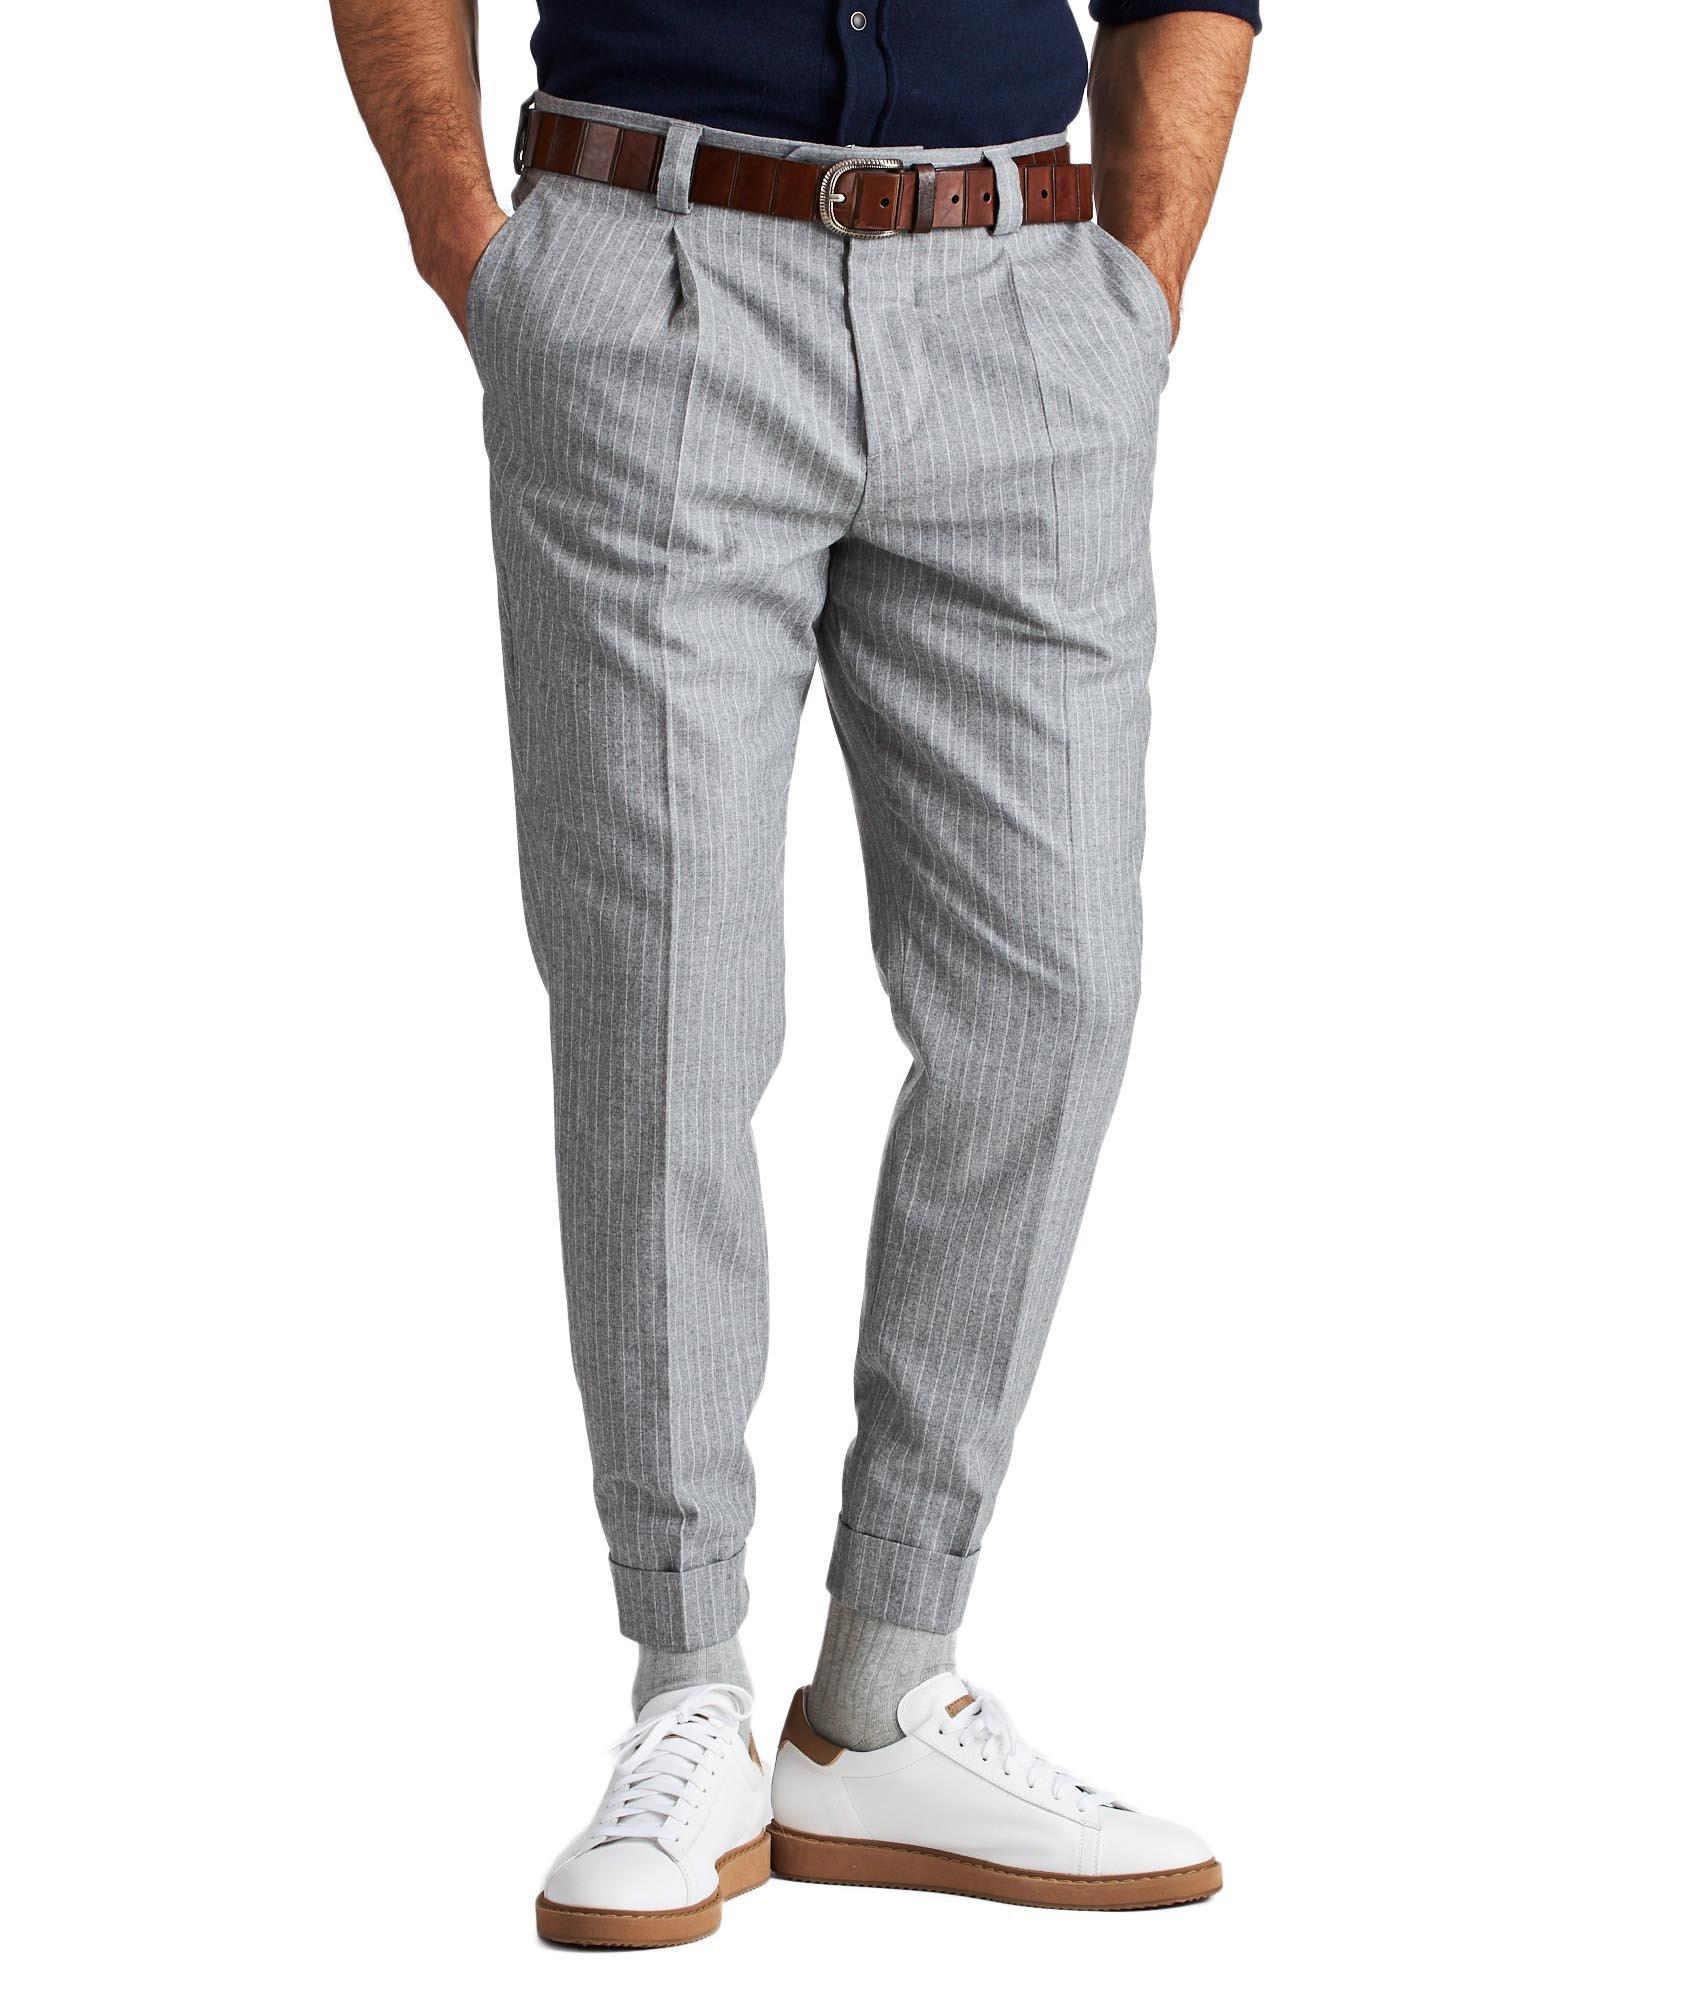 Contemporary Fit Pinstriped Dress Pants image 0